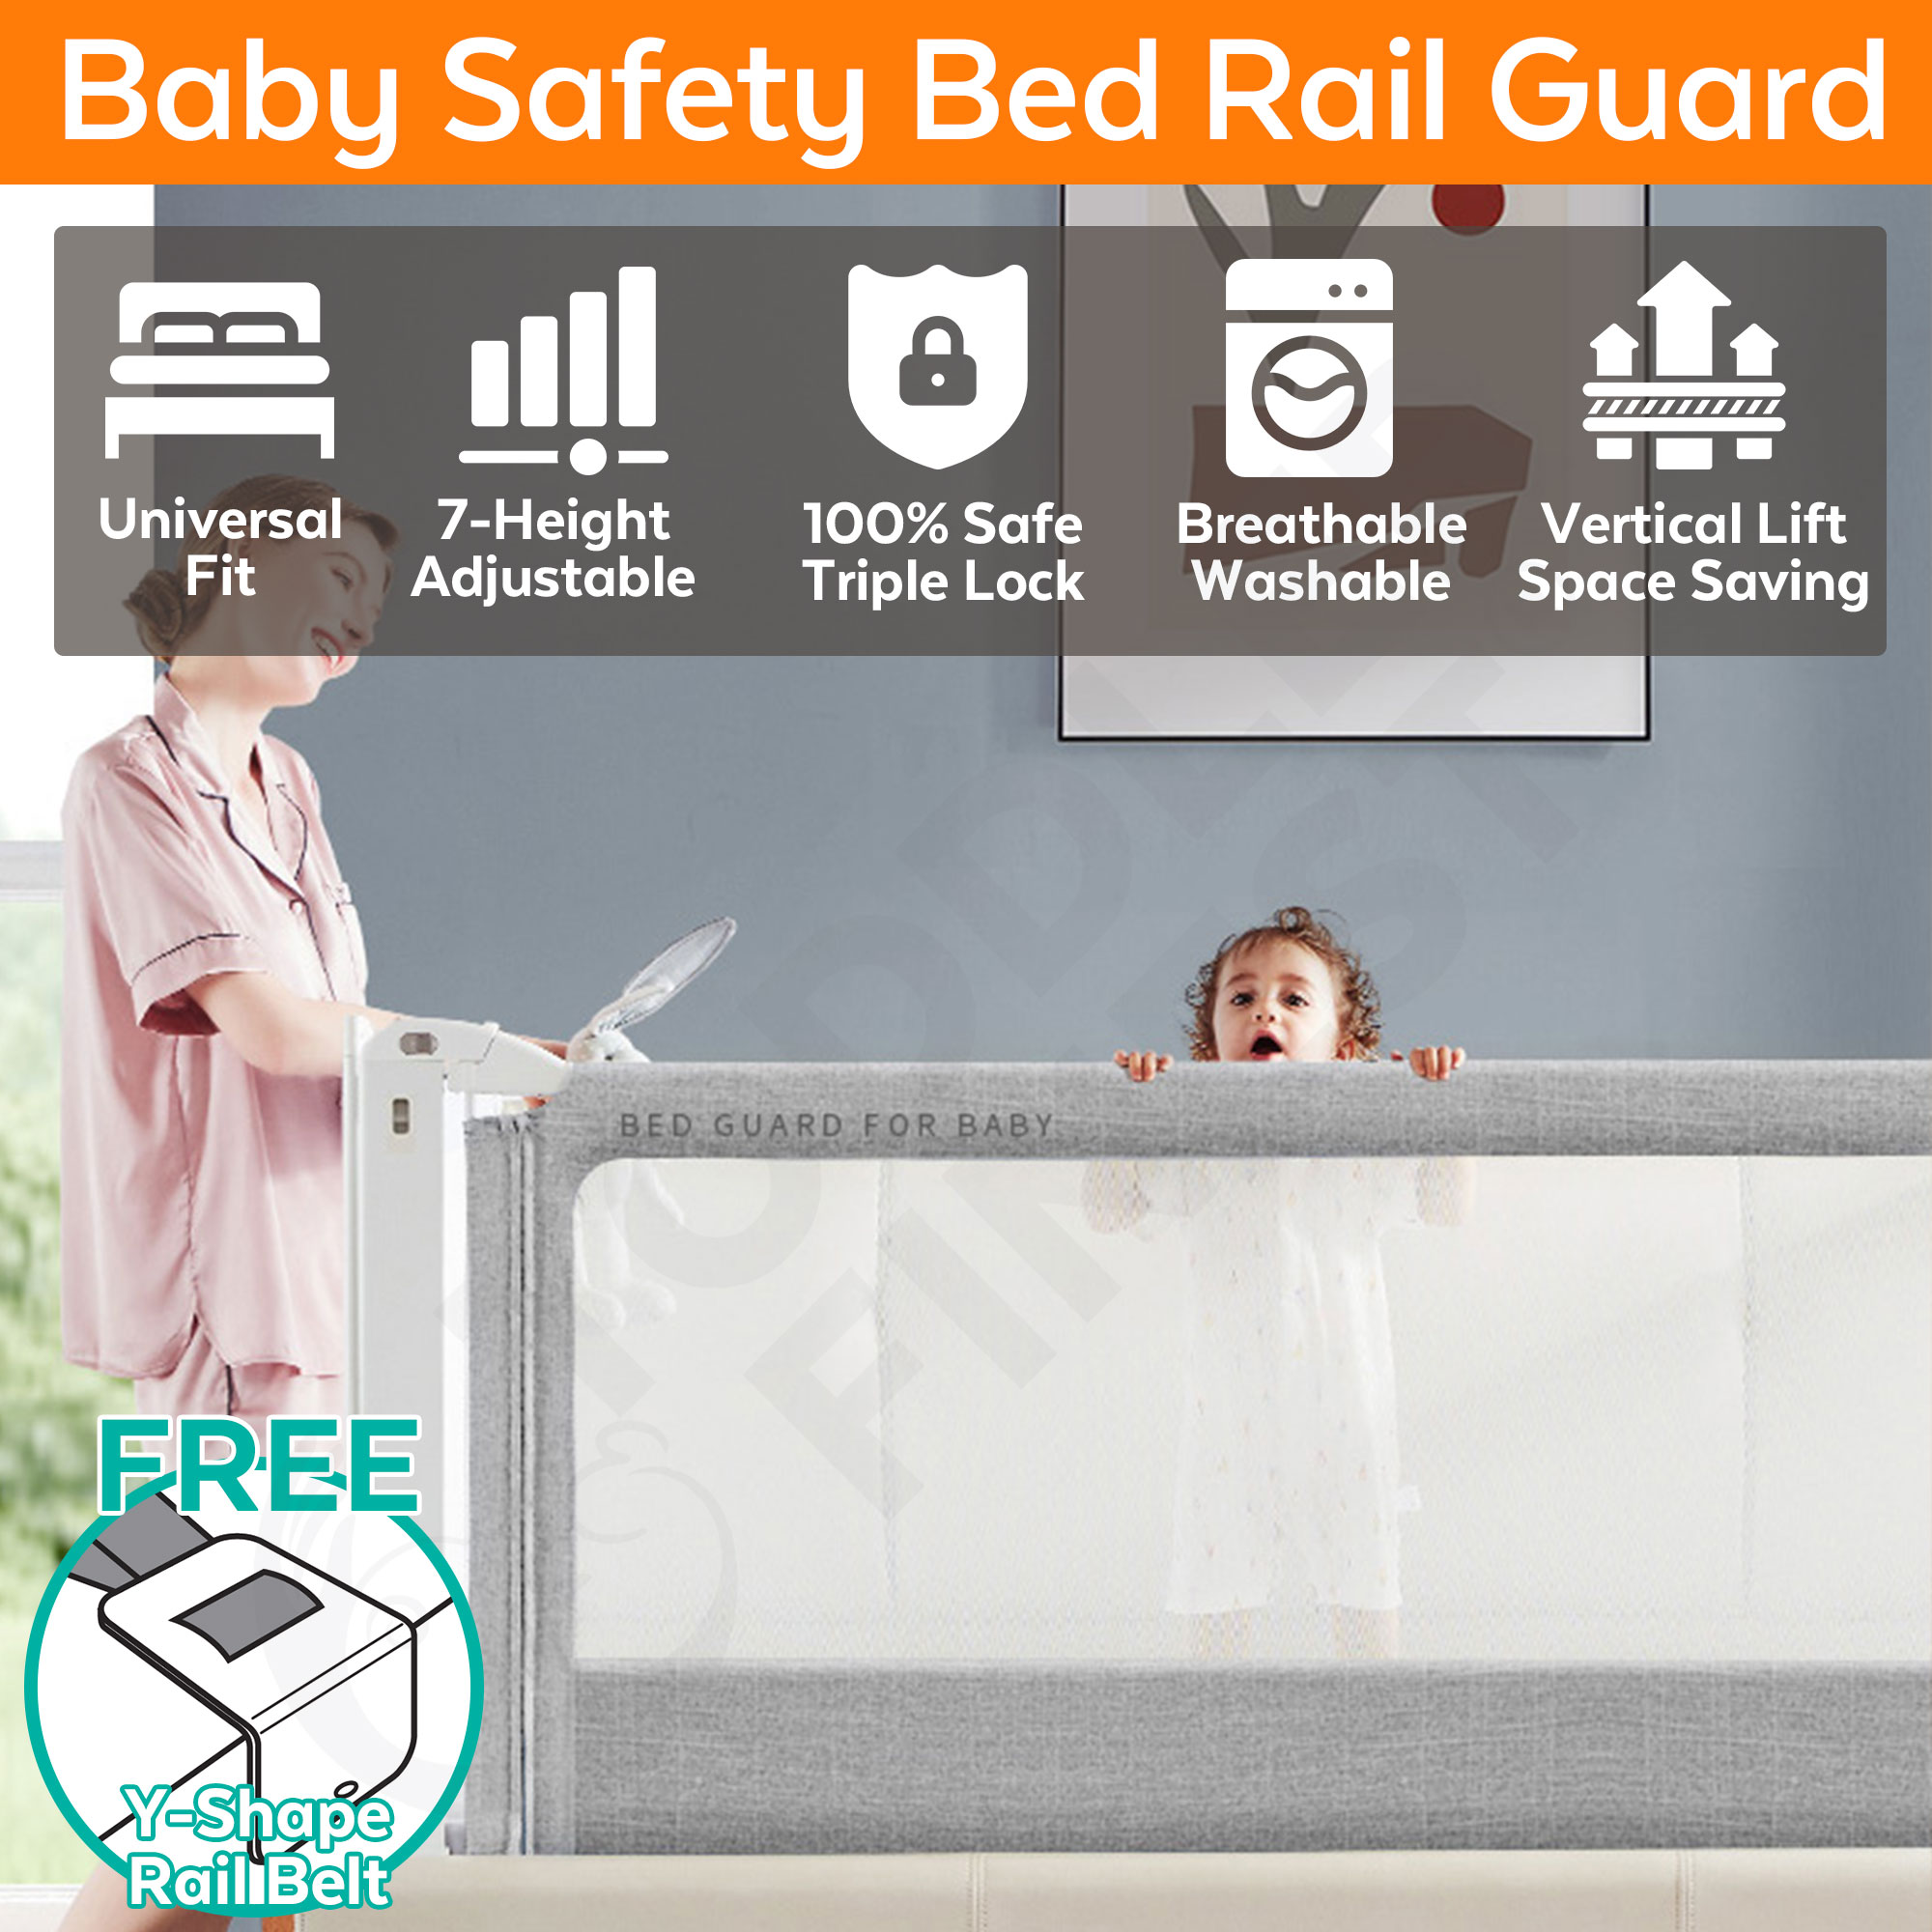 Baby Bed Guardrail Bed Rails for Toddlers Soft Bed Guard Fence Woven Twist Knot Bumpers Superfine Fiber Color : Gray+White+Blue, Size : 4m 